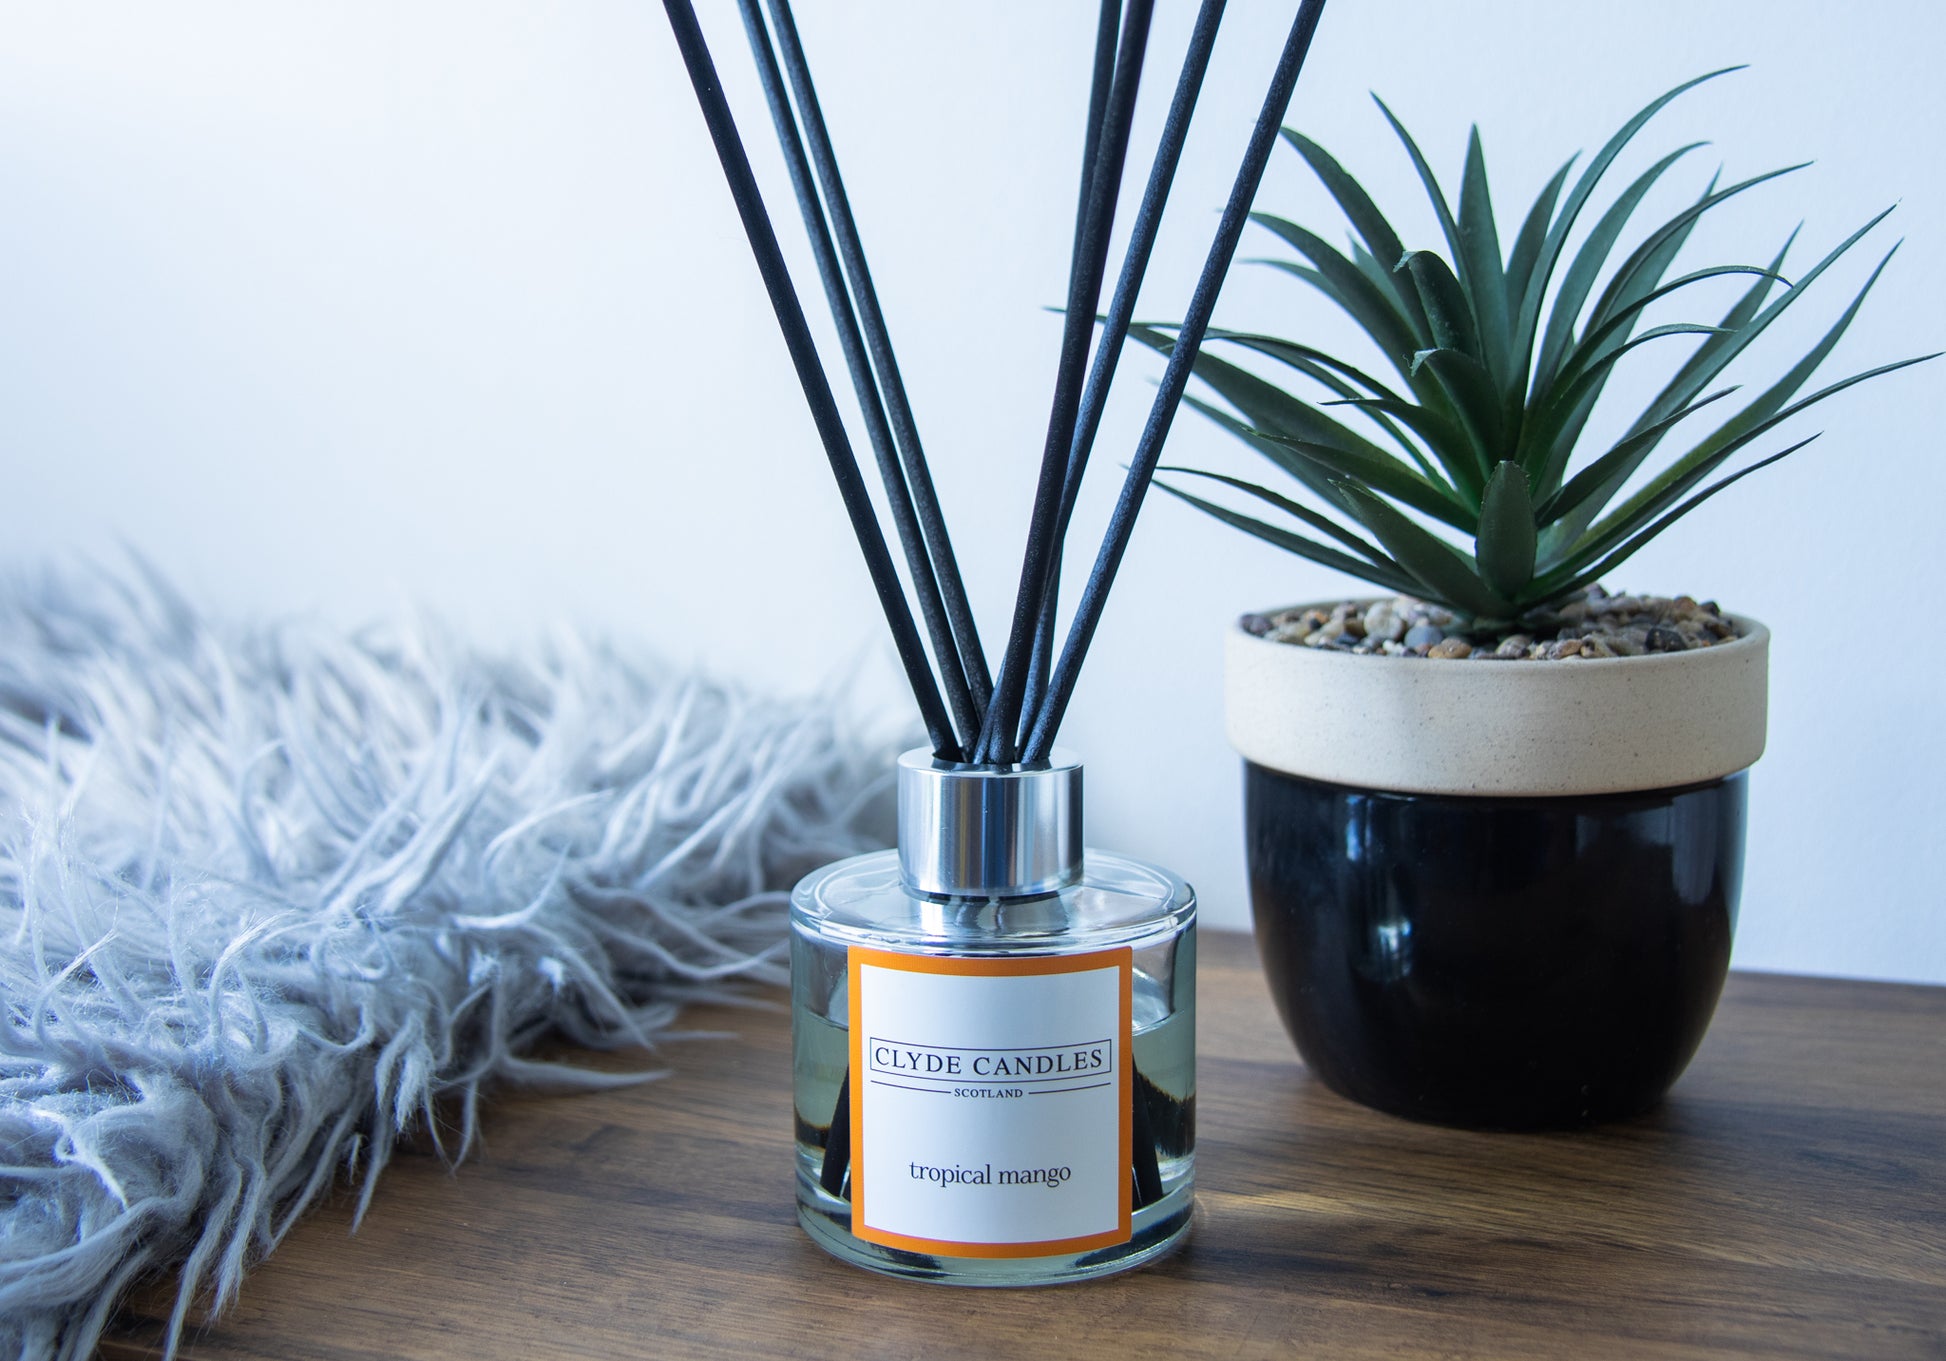 tropical mango Reed Diffuser - Clyde Candles, Luxury Diffuser Oil with a Set of 7 Fibre Sticks, 100ml, Best Aroma Scent for Home, Kitchen, Living Room, Bathroom. Fragrance Diffusers set with sticks